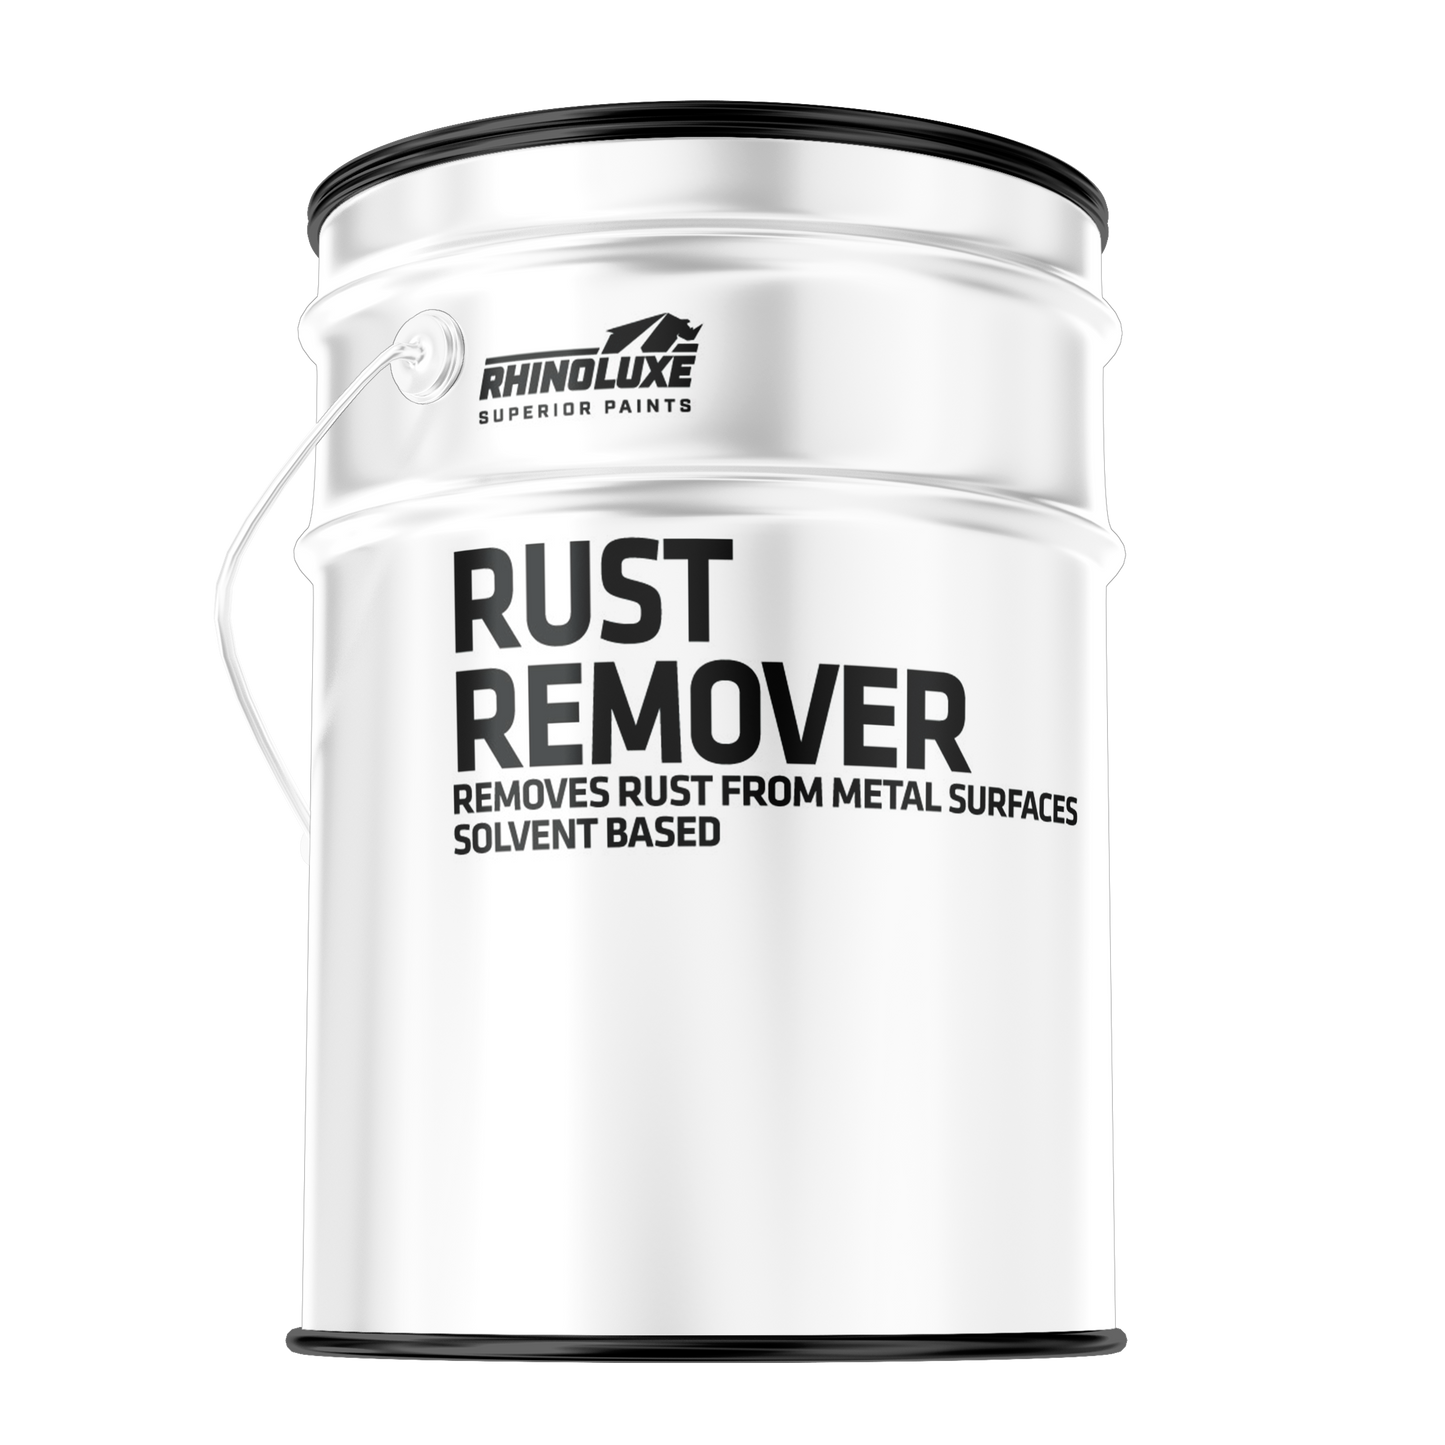 Rust Remover Solvent Based Remove Metal Rust